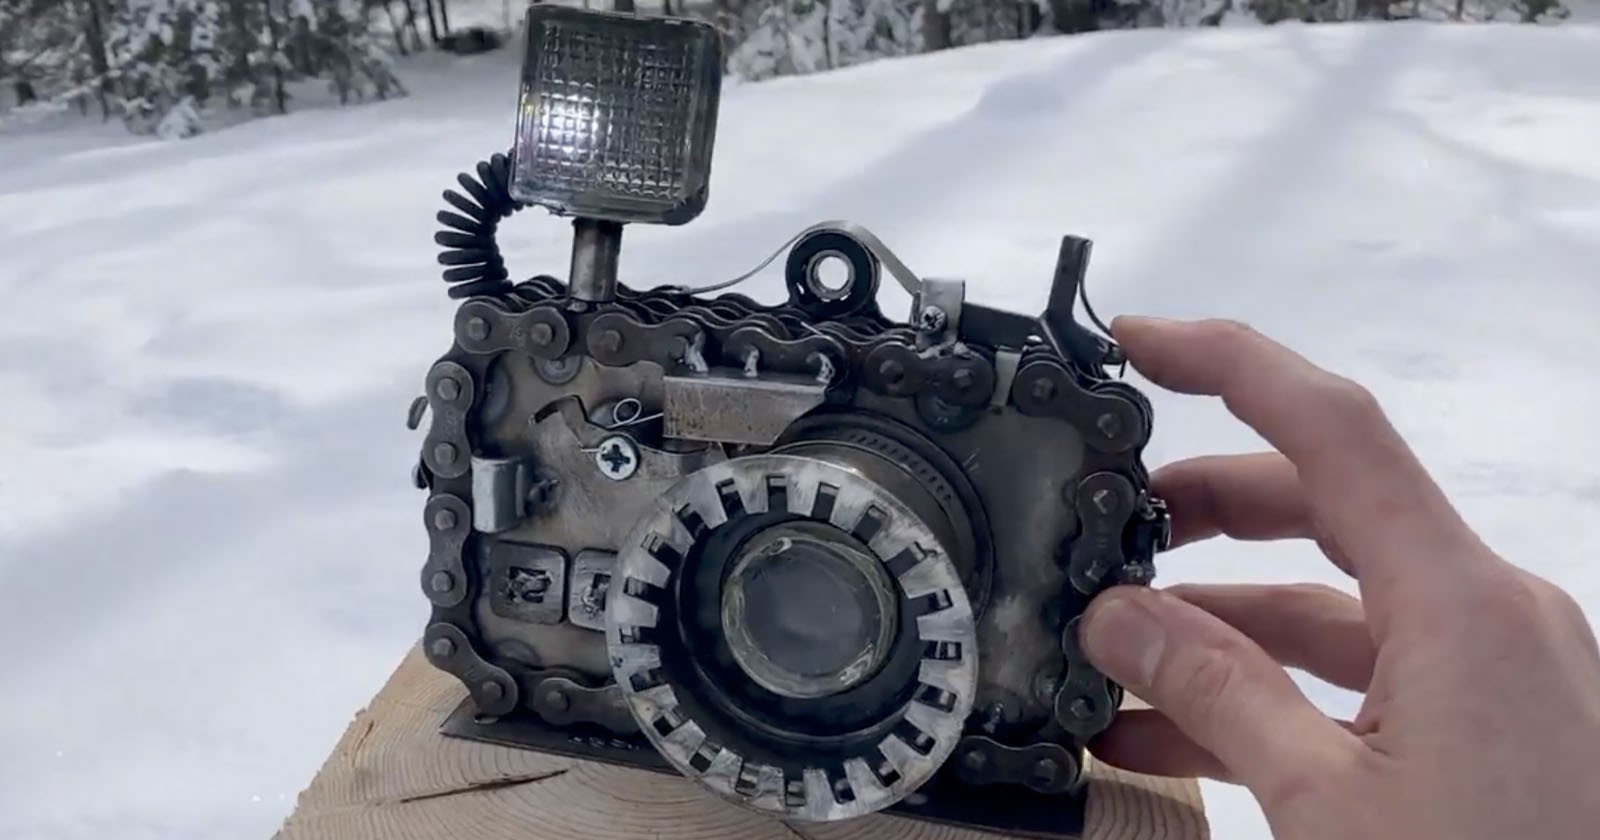 Artist Builds a Scrap Metal Camera with Working Flash and Shutter Button